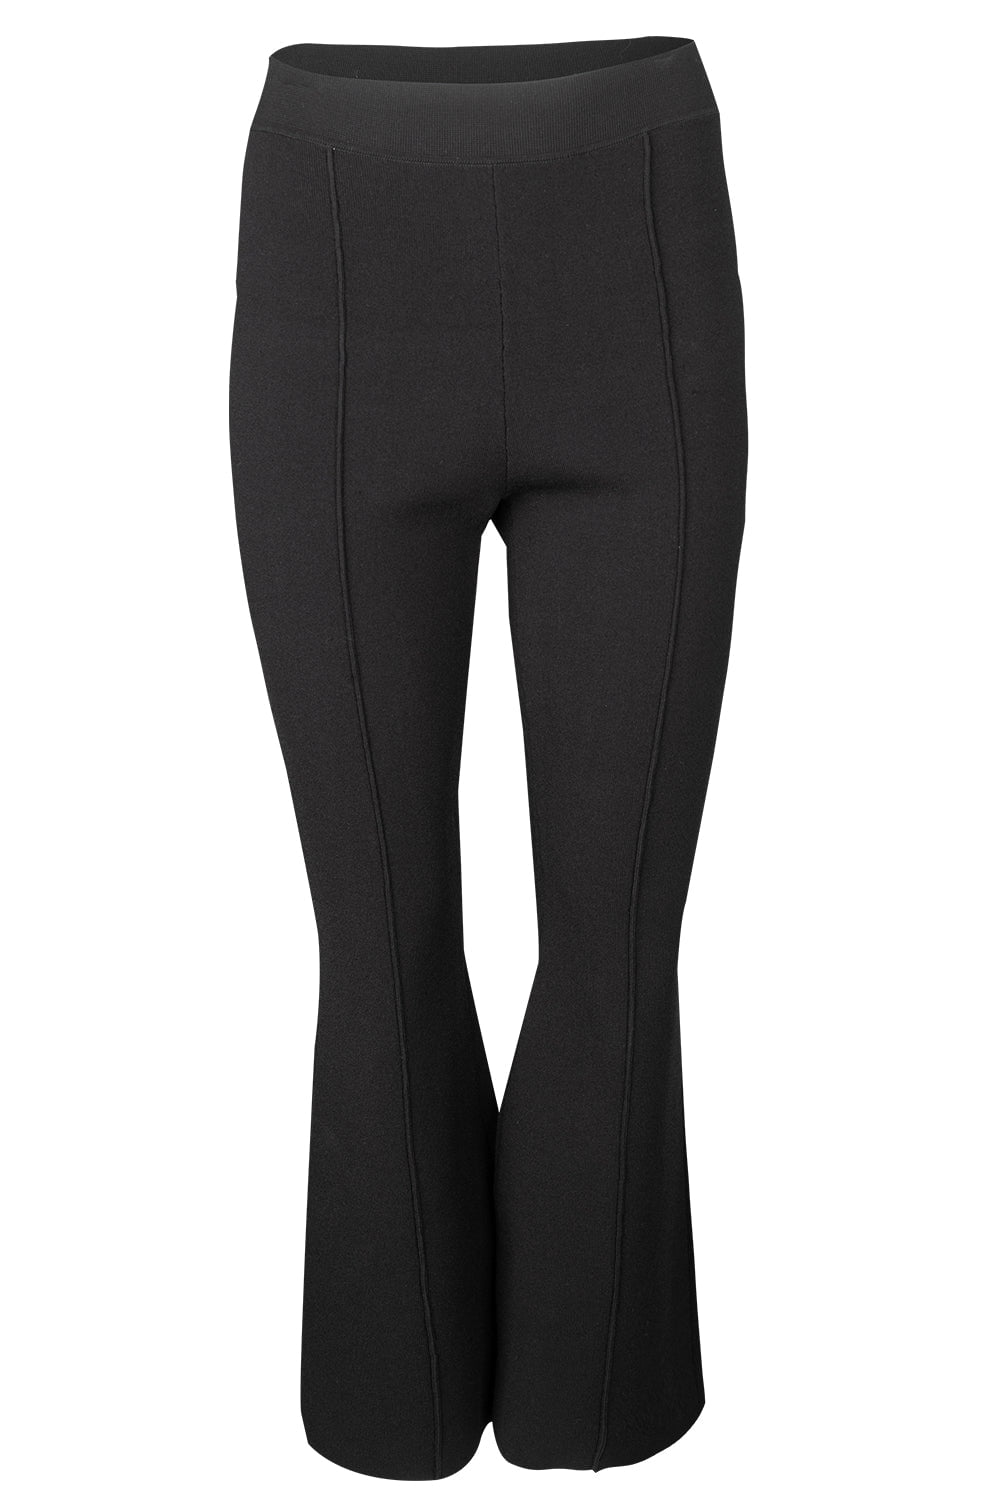 ADAM LIPPES-Cropped Kennedy Pant-